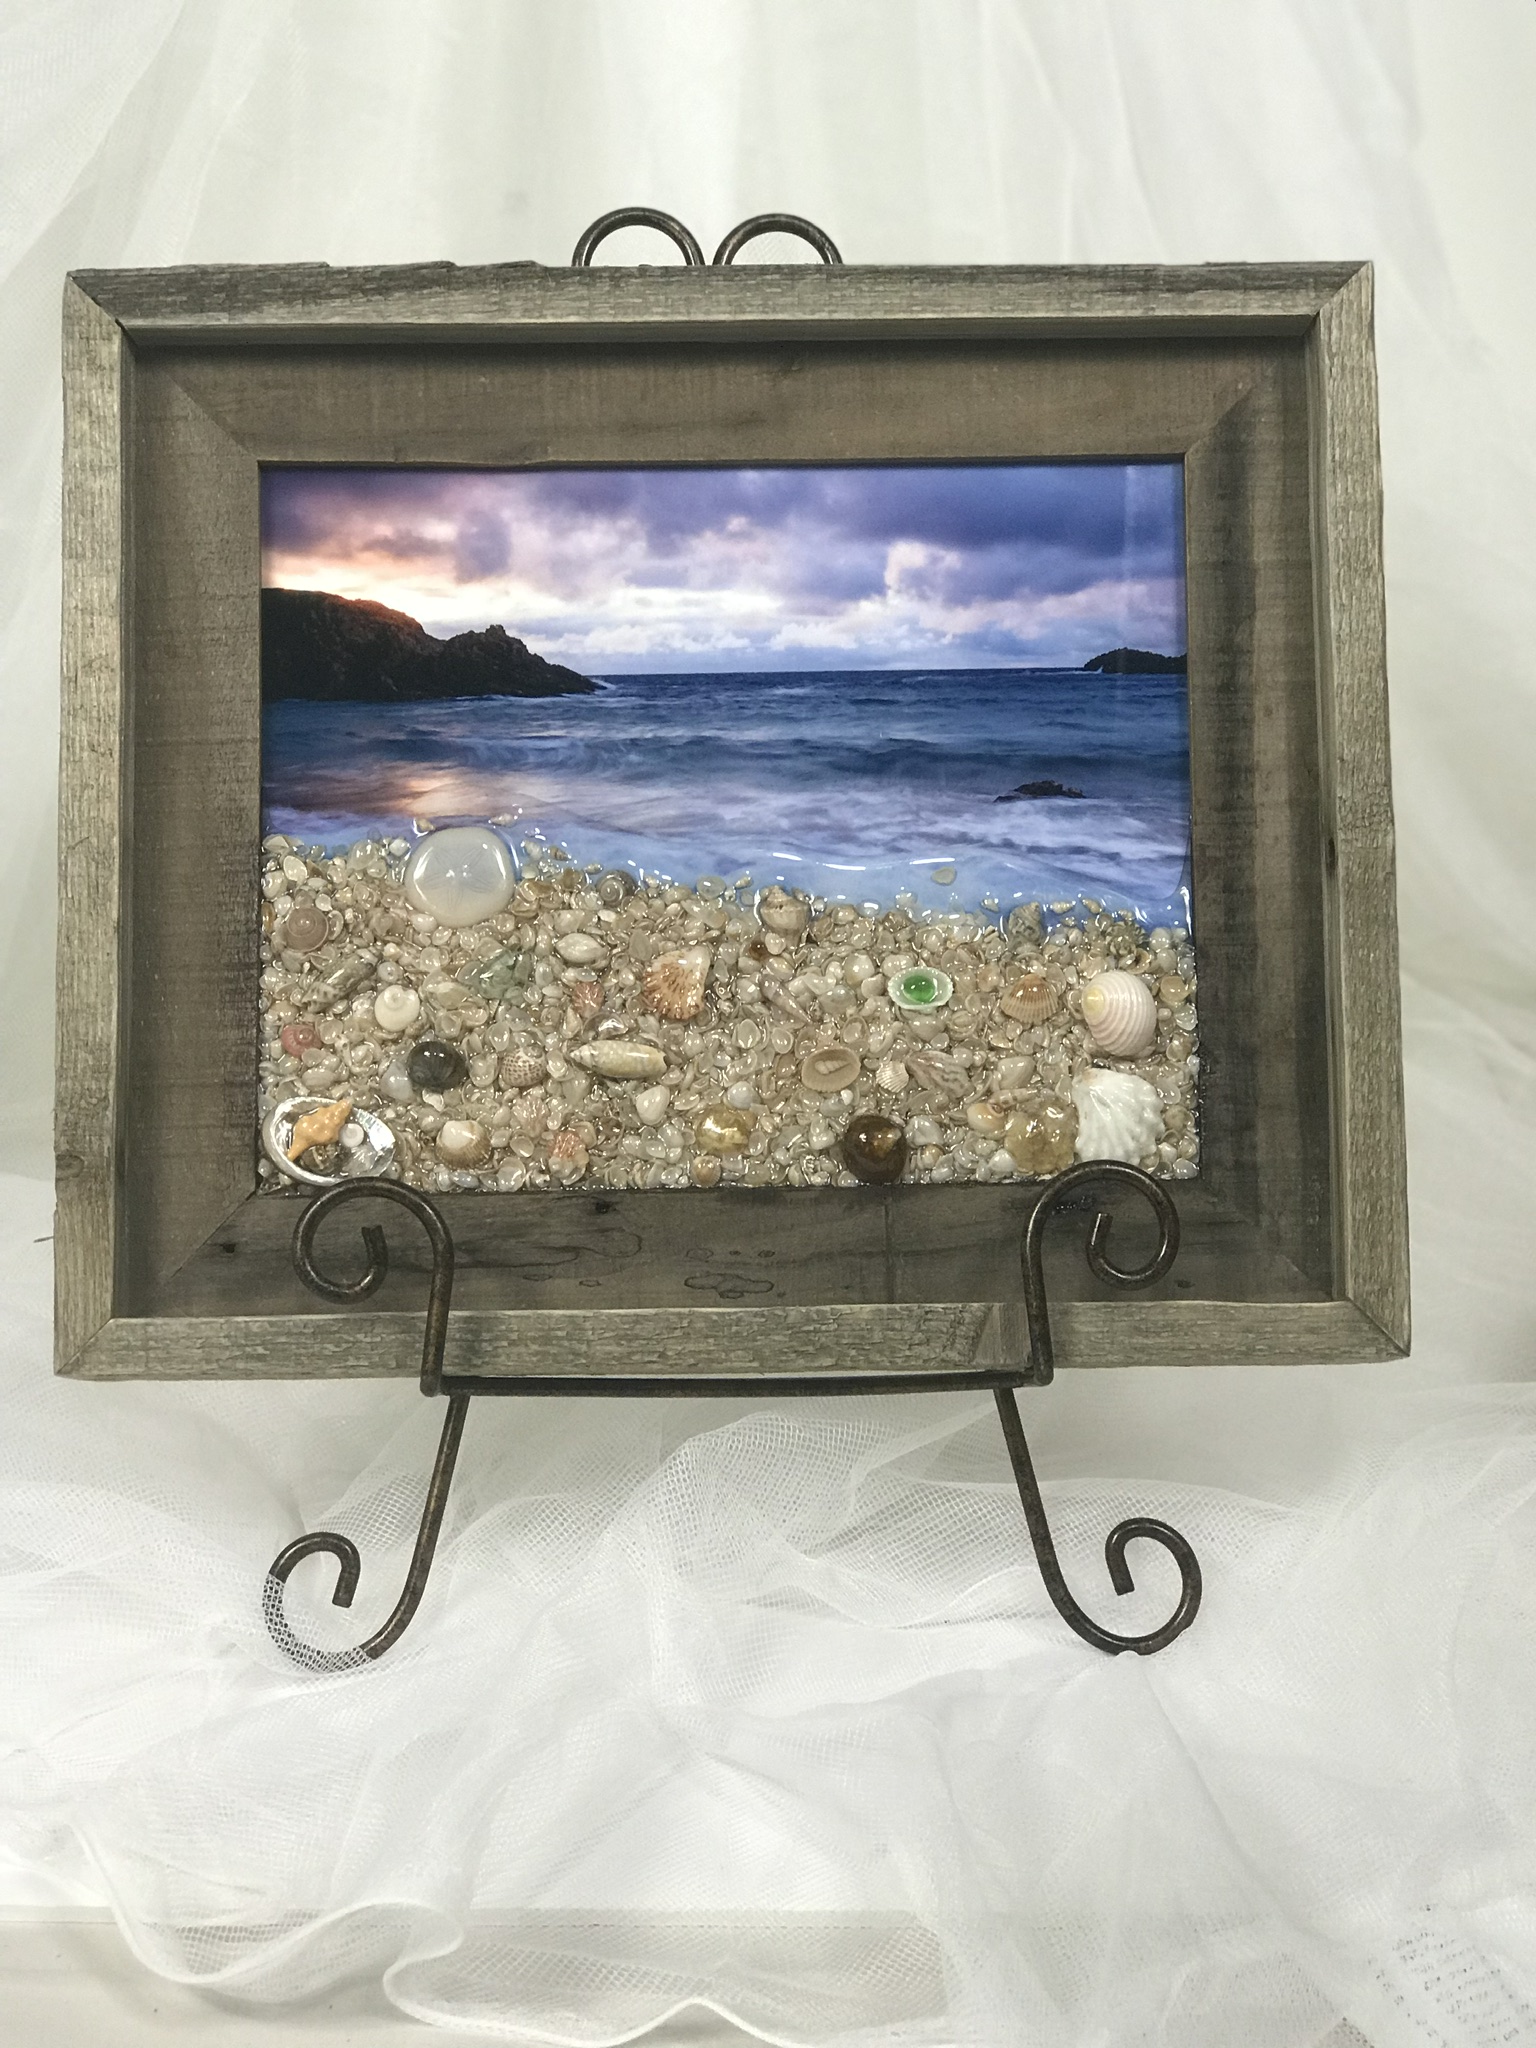 This is a piece I created using a 8x10 Chromaluxe white coated metal then added sea shells I co